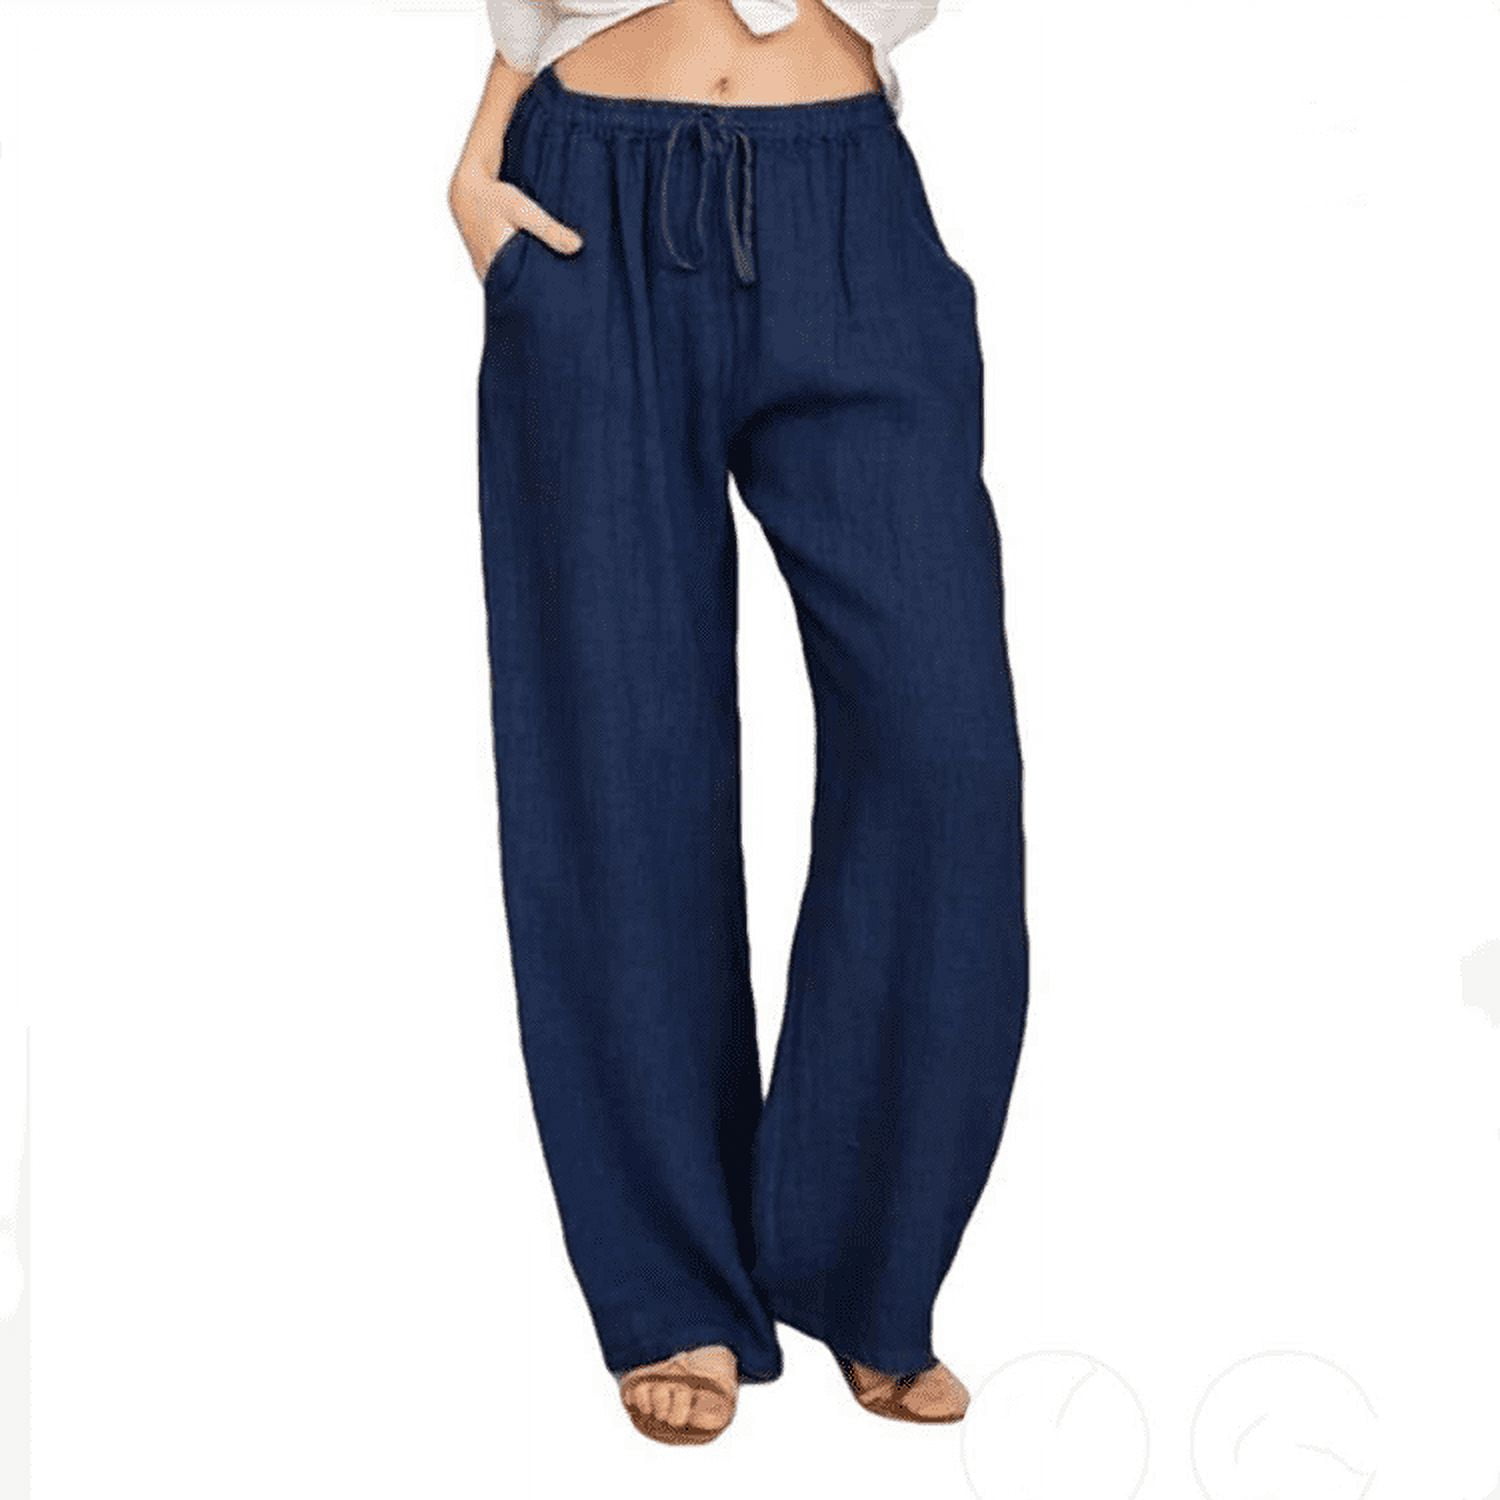 Women's Linen Plus Size High Waisted Loose Fit Pants Drawstring Closure  Gothic Trousers for Women